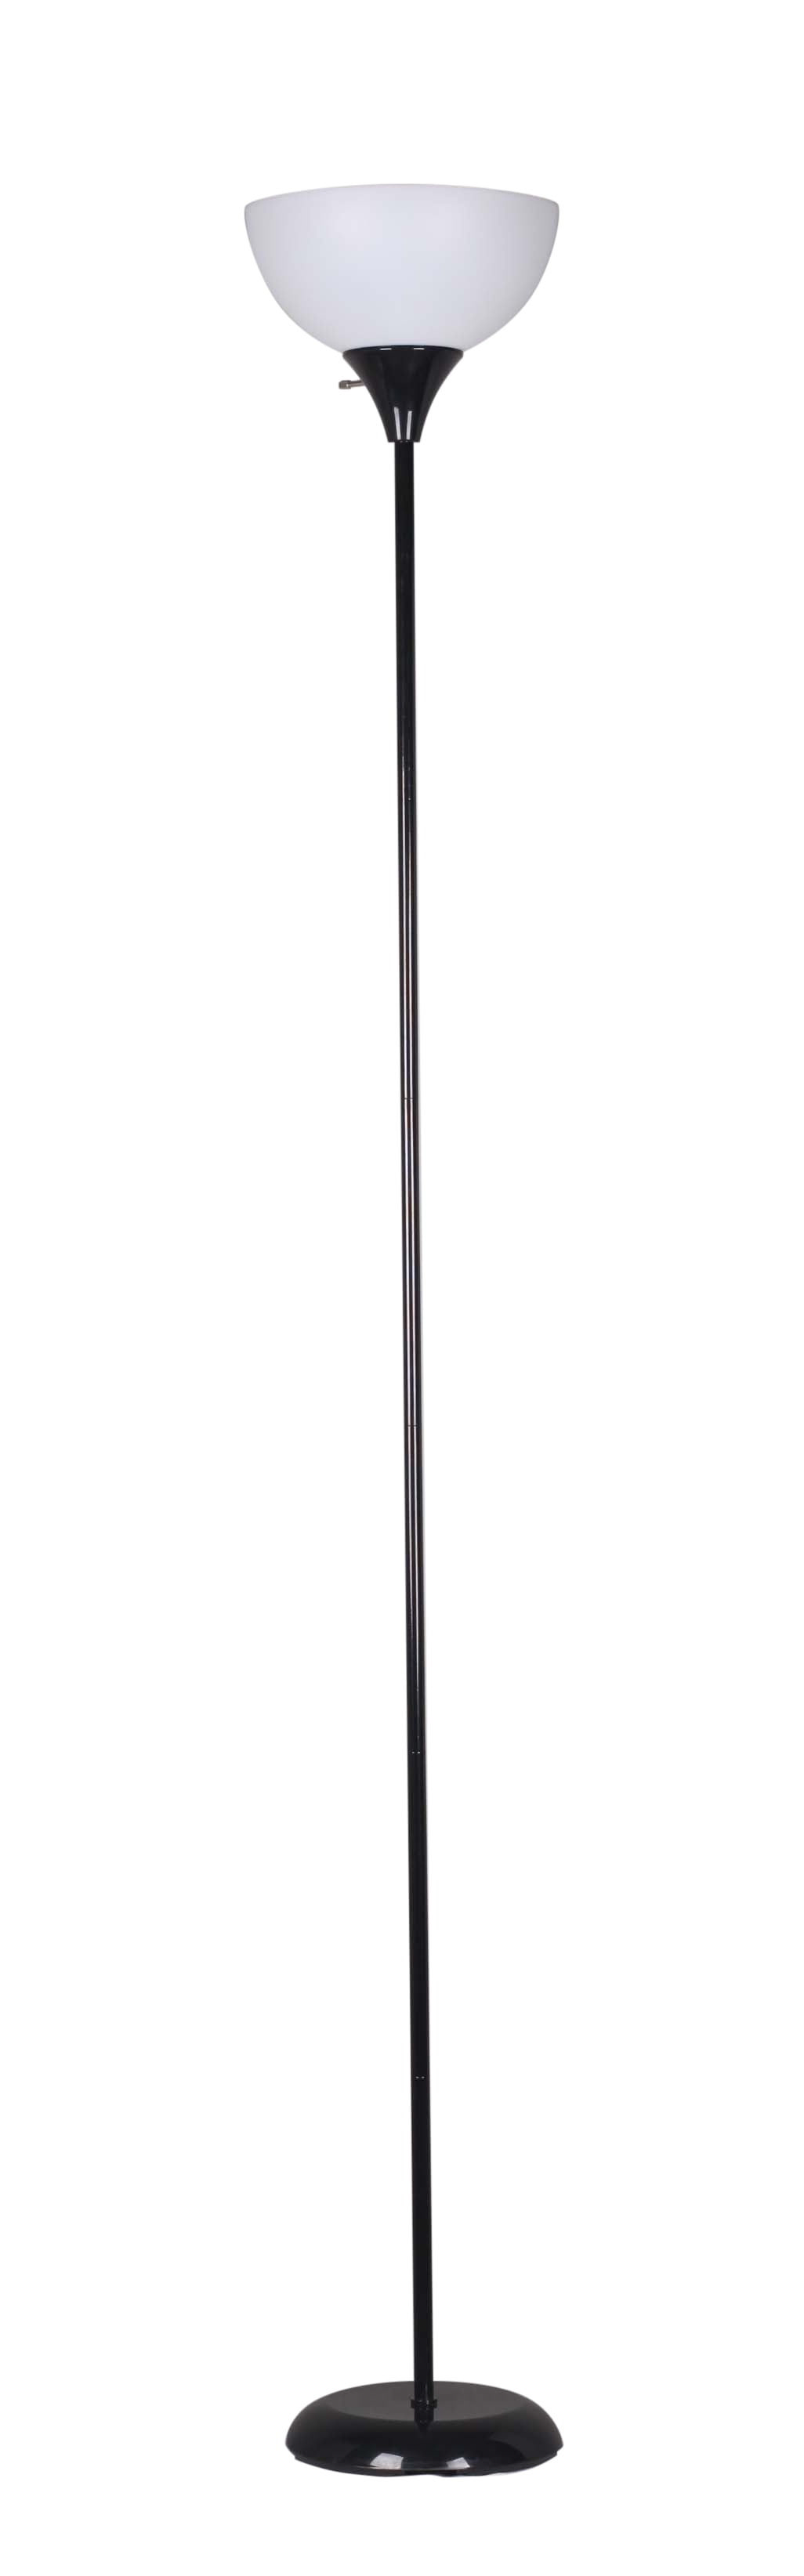 71 Inch Floor Lamp Living Room Light Stand Scoop Shade Read Torchiere Lamp 150W 